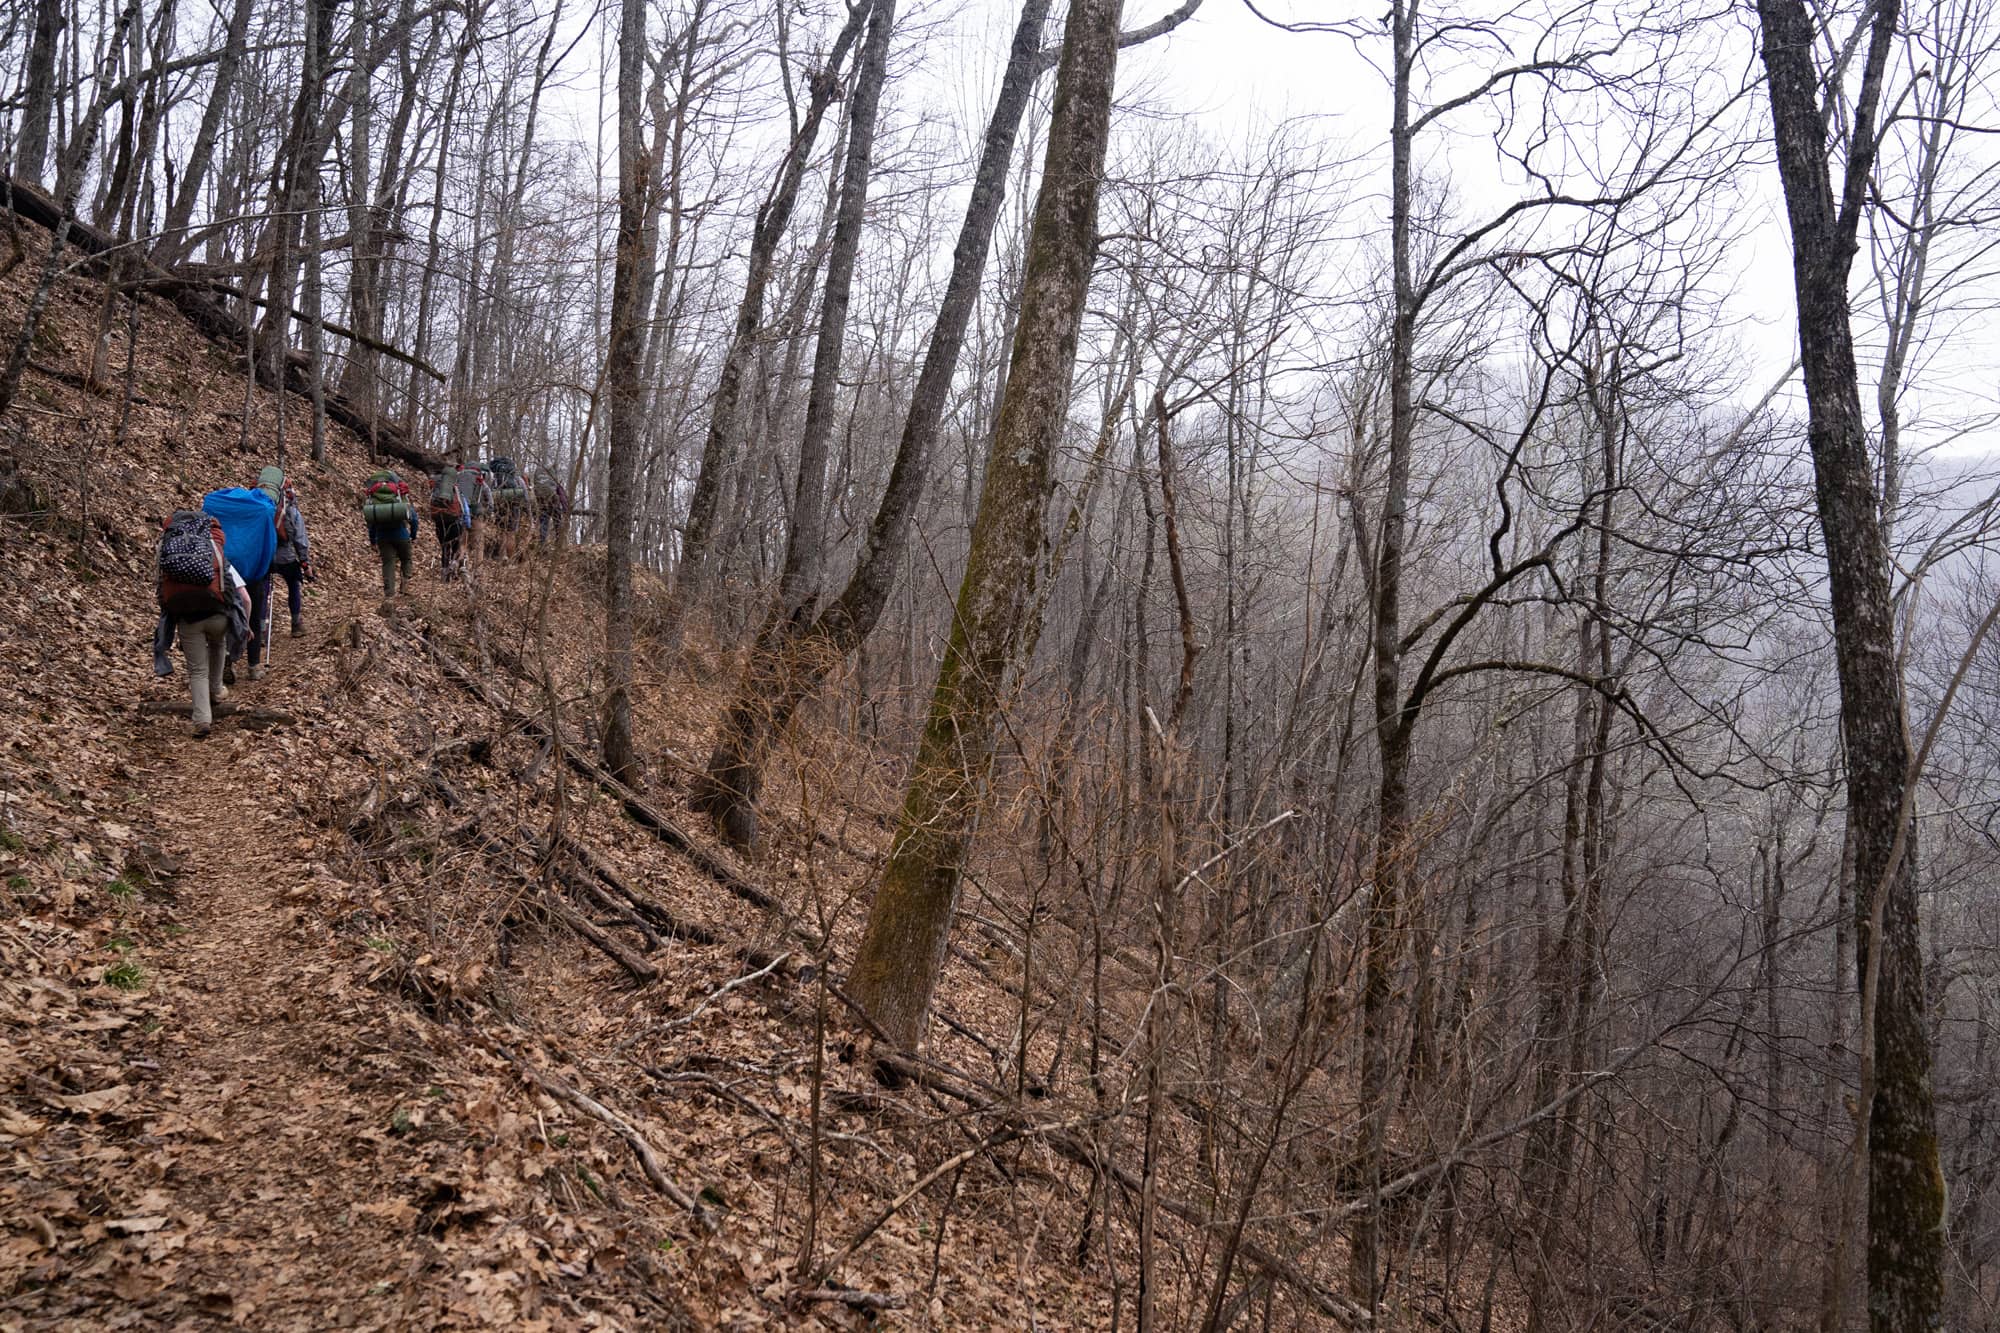 Ohio University students gain elevation during their third day backpacking a section of the Appalachian Trail in the Nantahala National Forest on Monday, March 7, 2022, near Franklin, North Carolina.